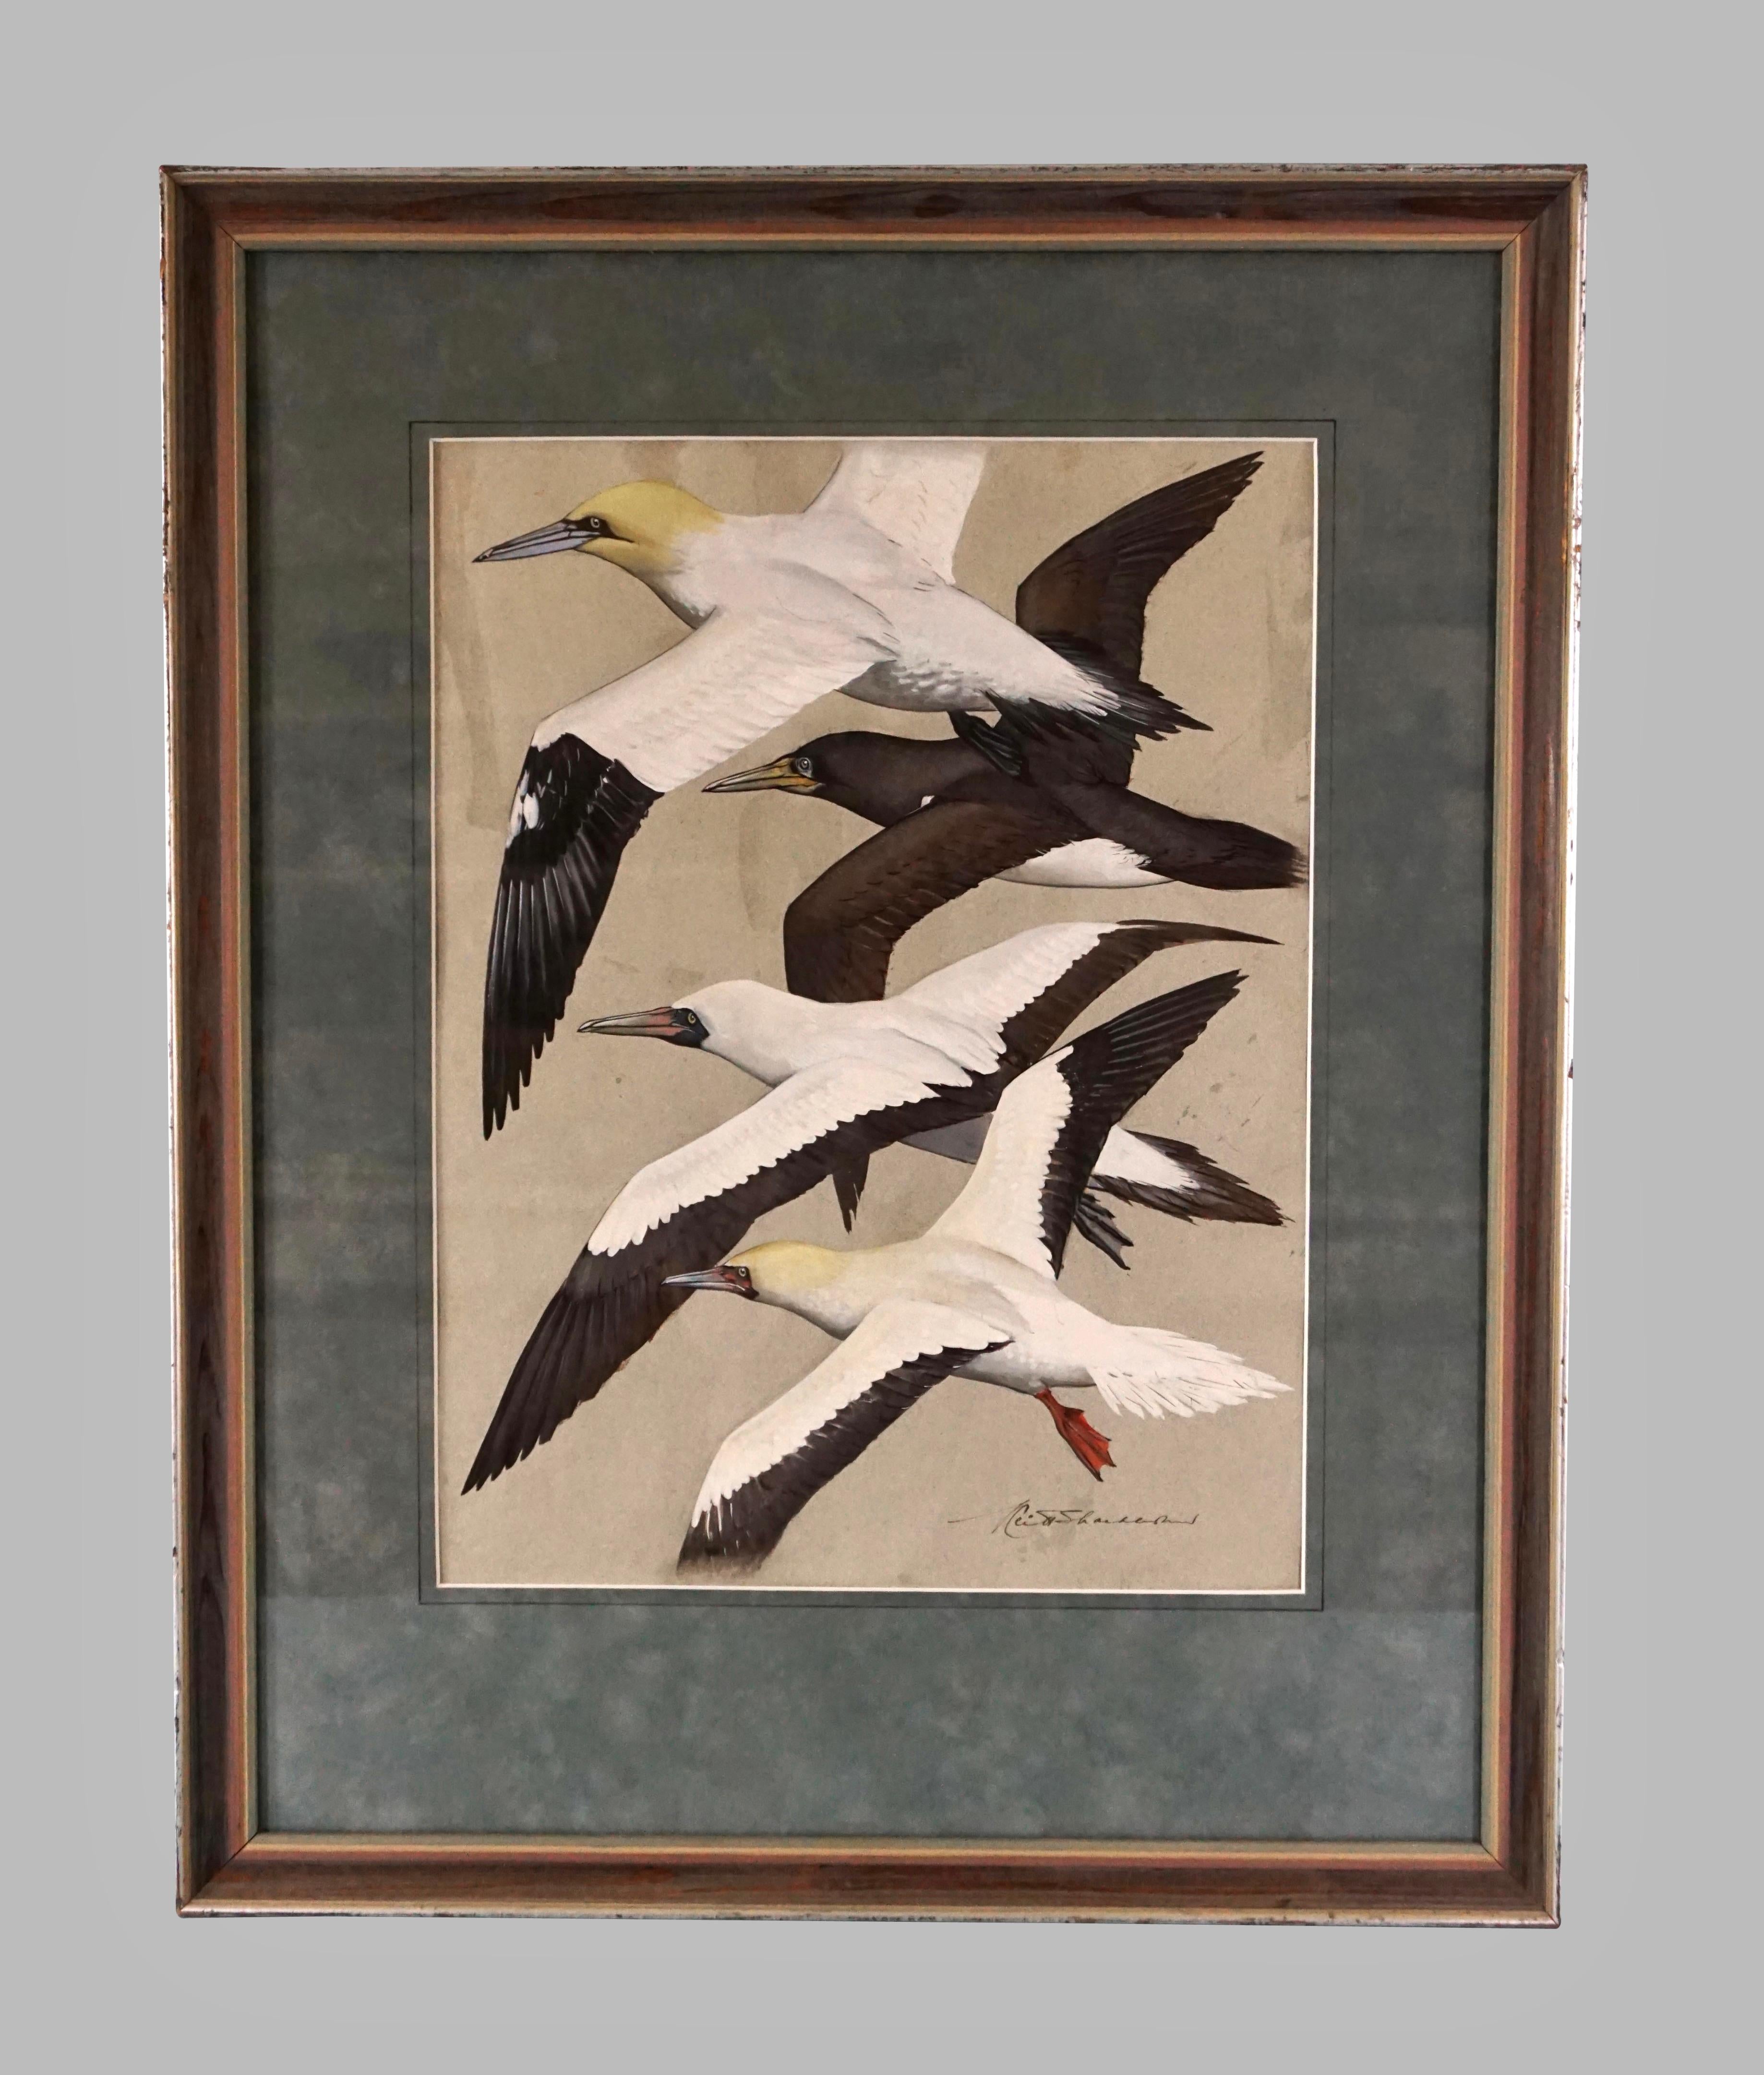 A dramatic gouache on paper of gannetts and boobies by Keith Shackleton (English 1923-2015), a well-known British naturalist and artist. Signed lower right. Shackleton was appointed Member of the Order of the British Empire in 2012 for his efforts